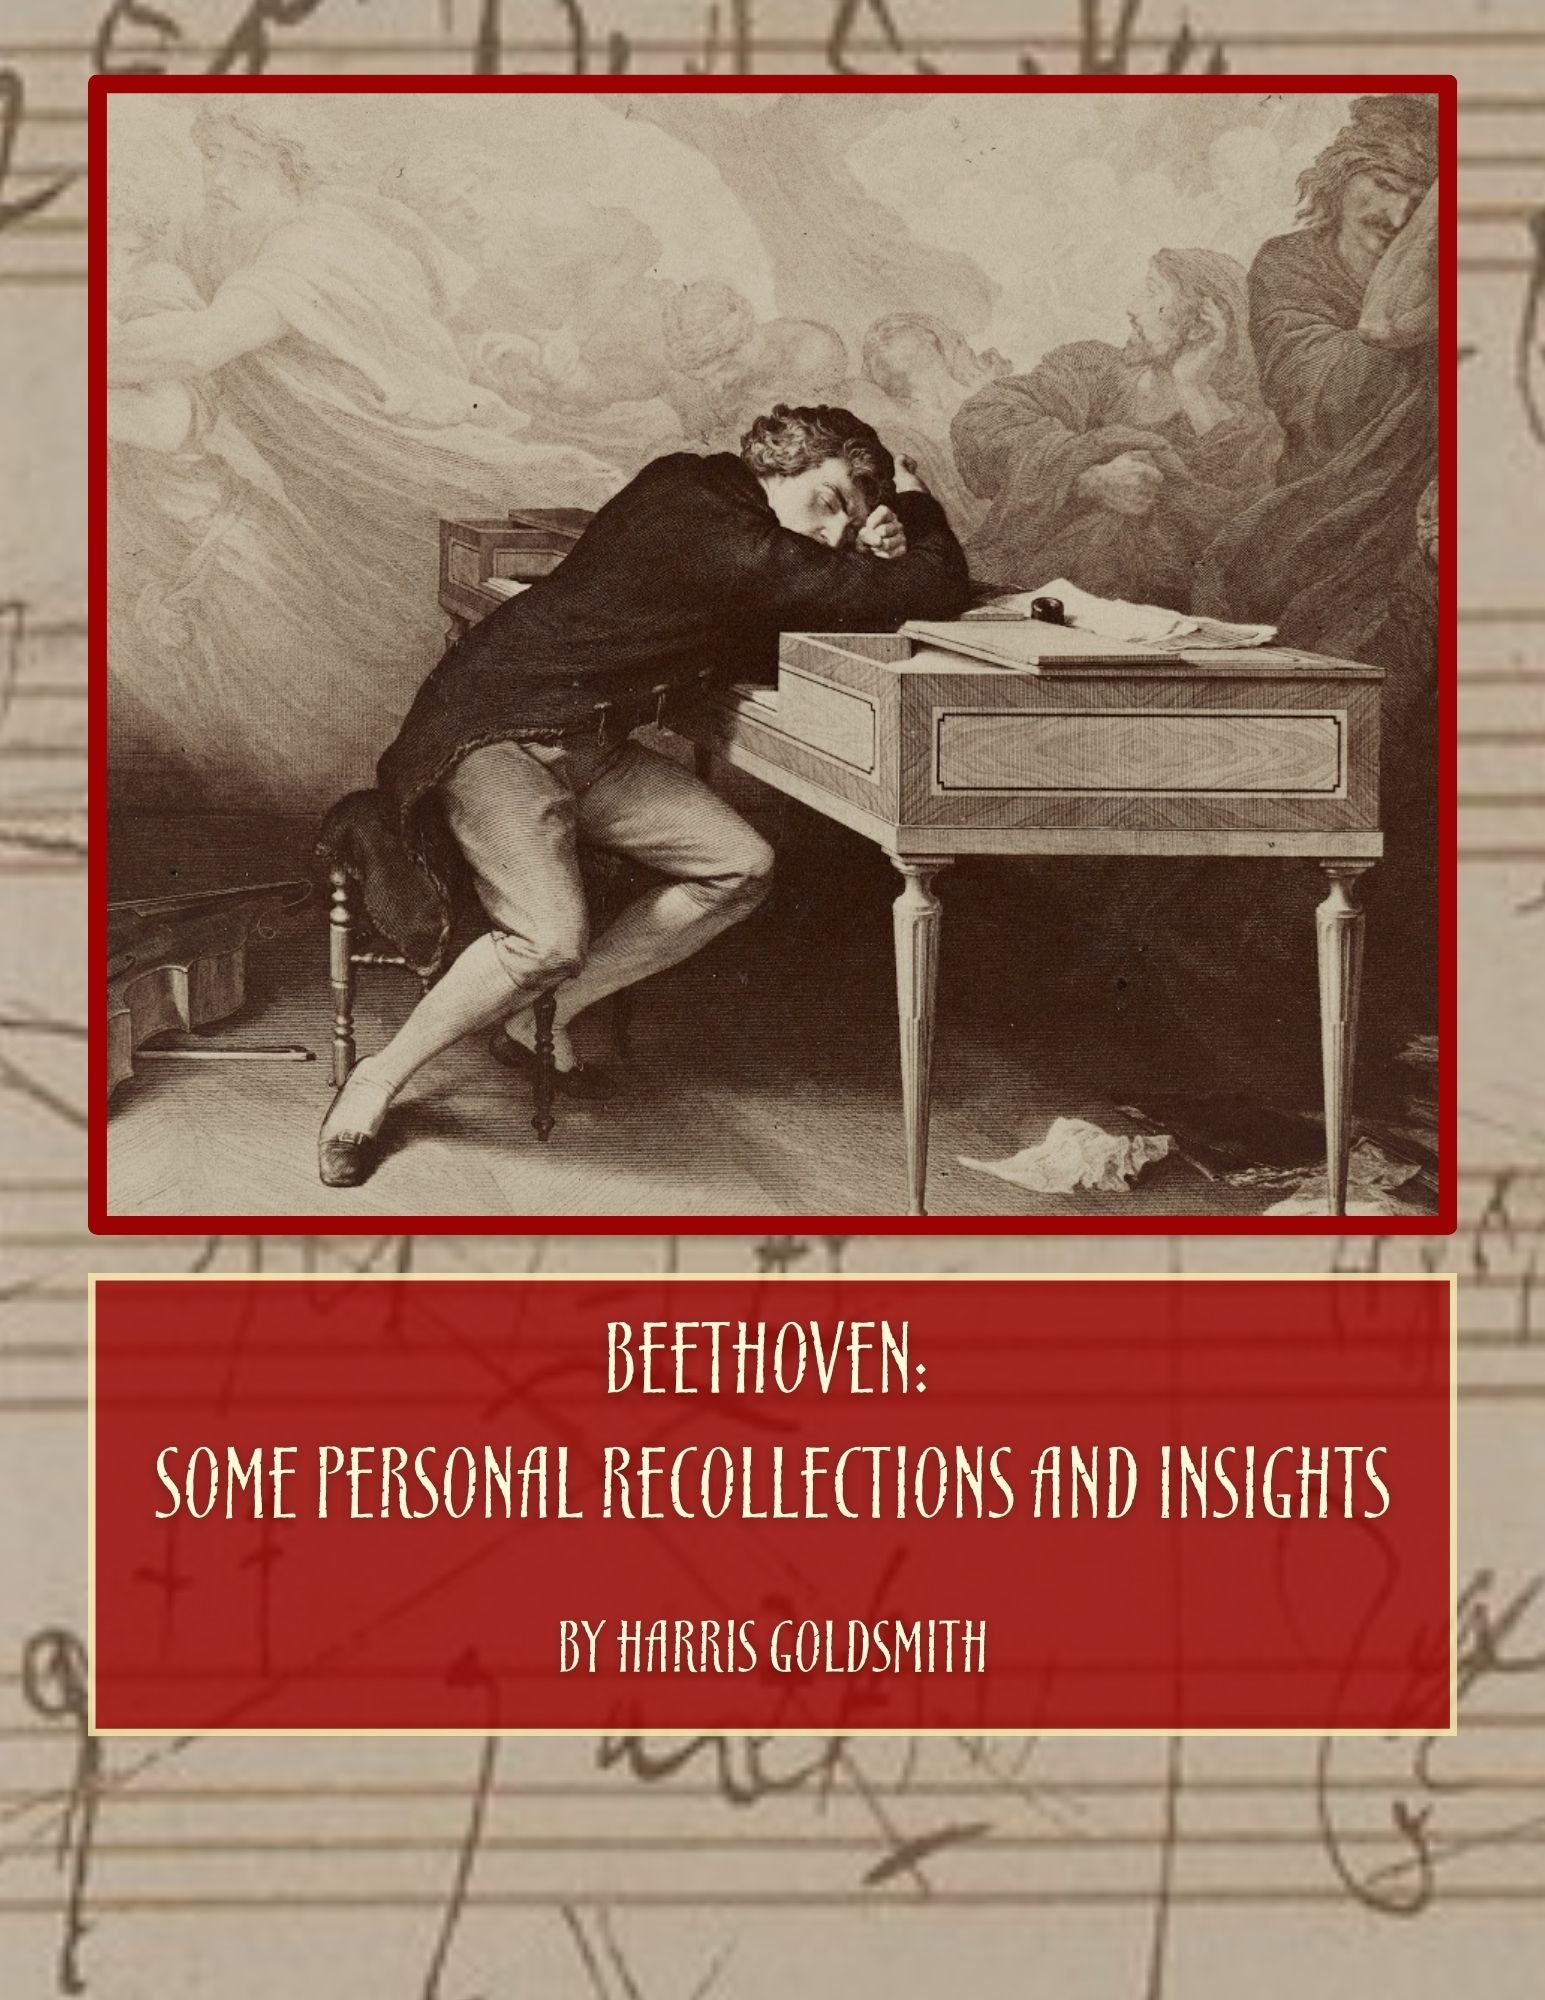 Beethoven: Some Personal Recollections and Insights